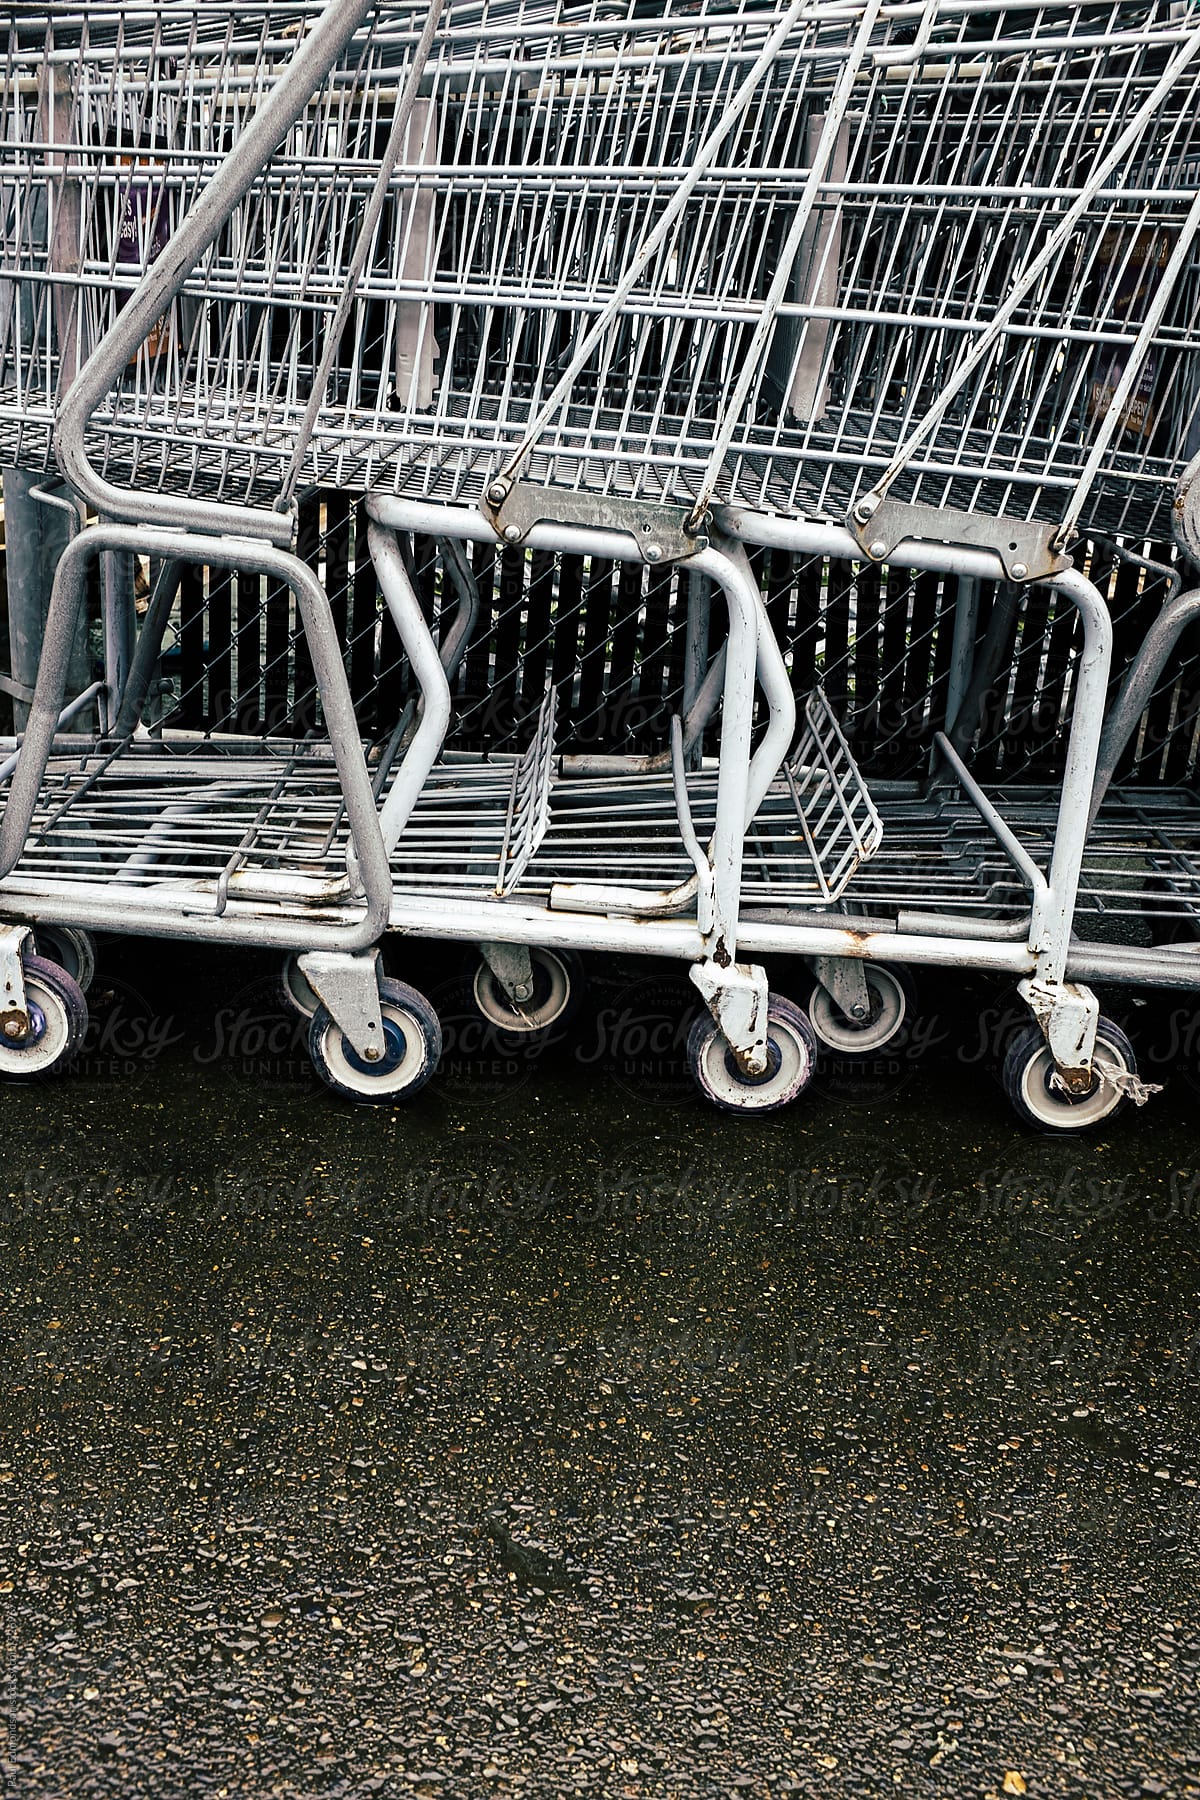 Row of metal grocery carts outside store